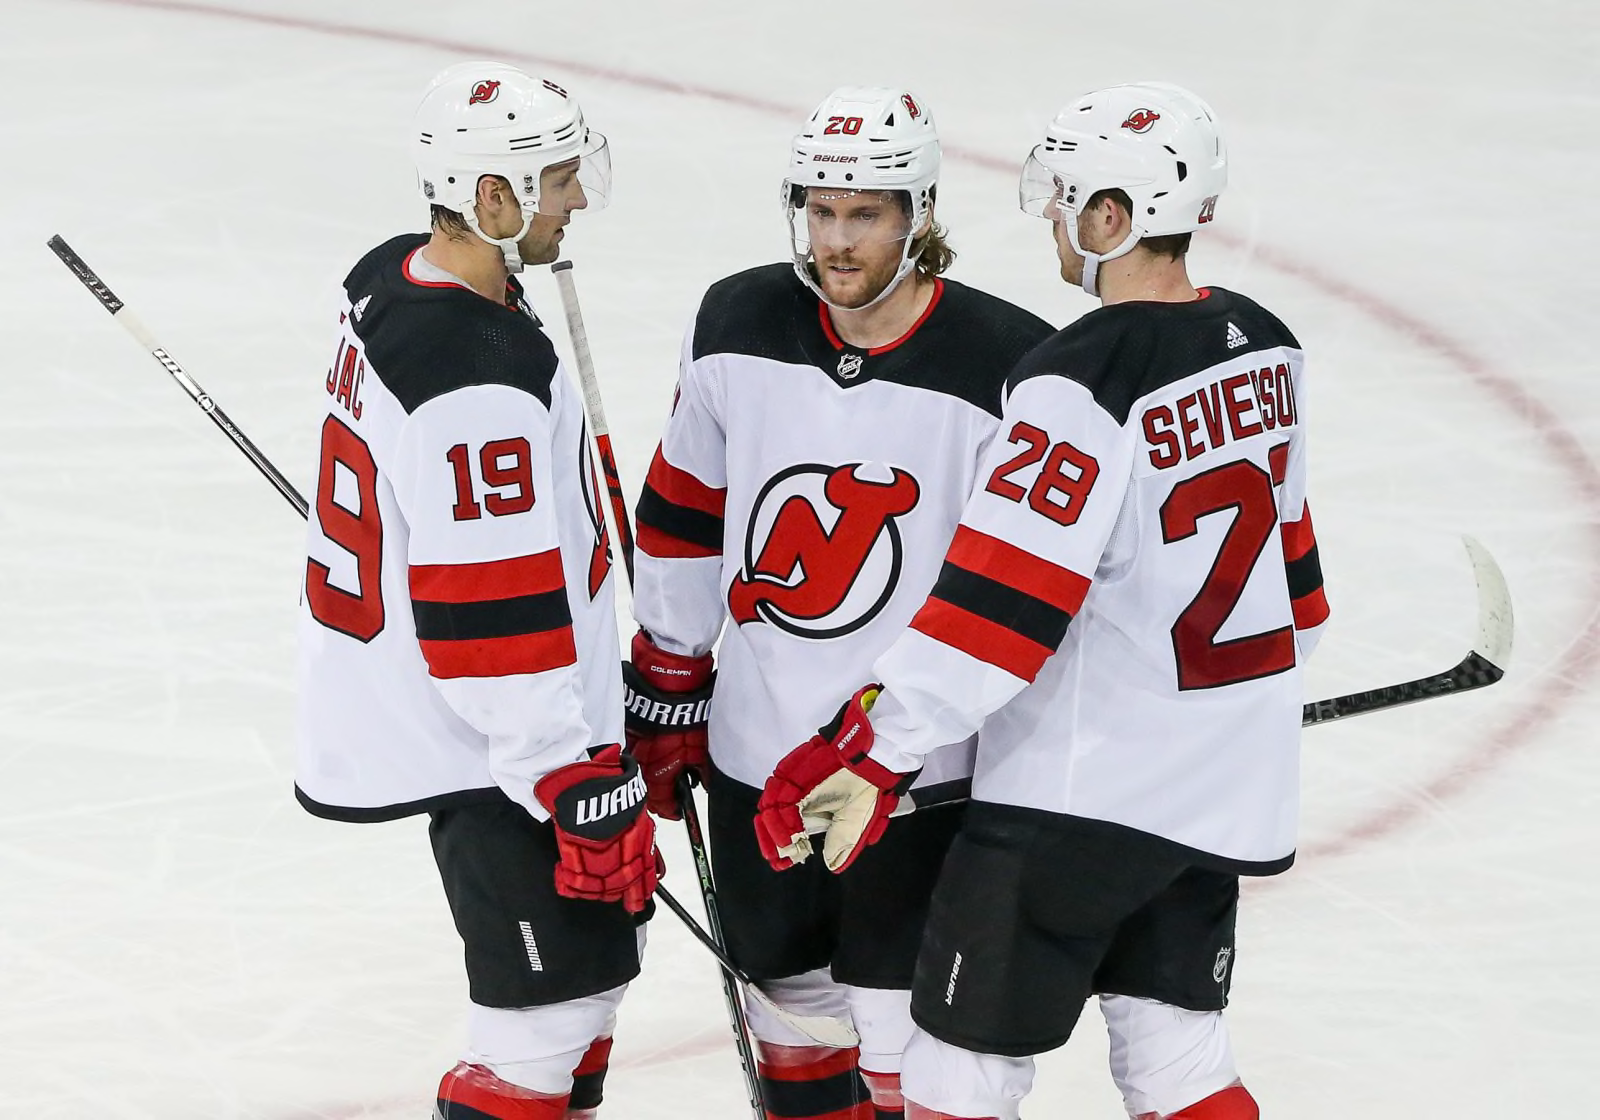 tickets to new jersey devils